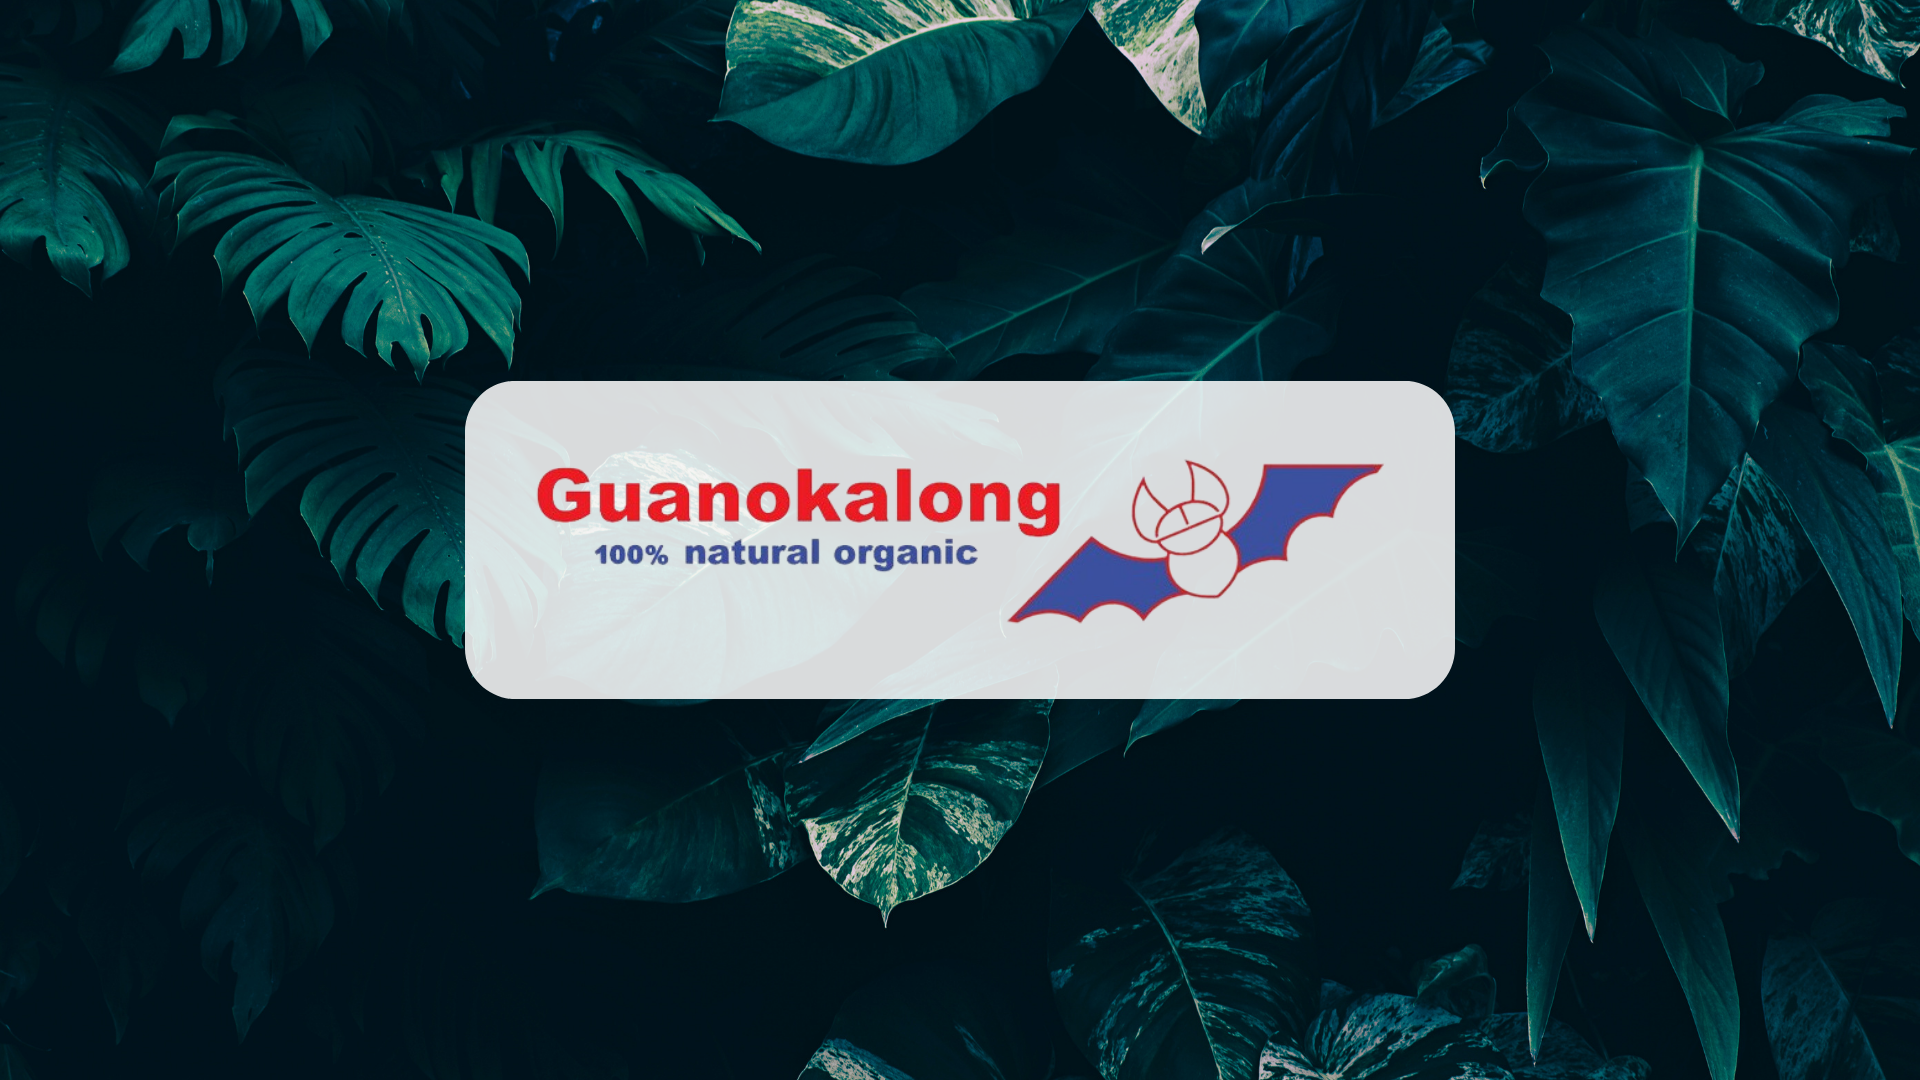 Guanakalong Nutrient Range: Complete Guide